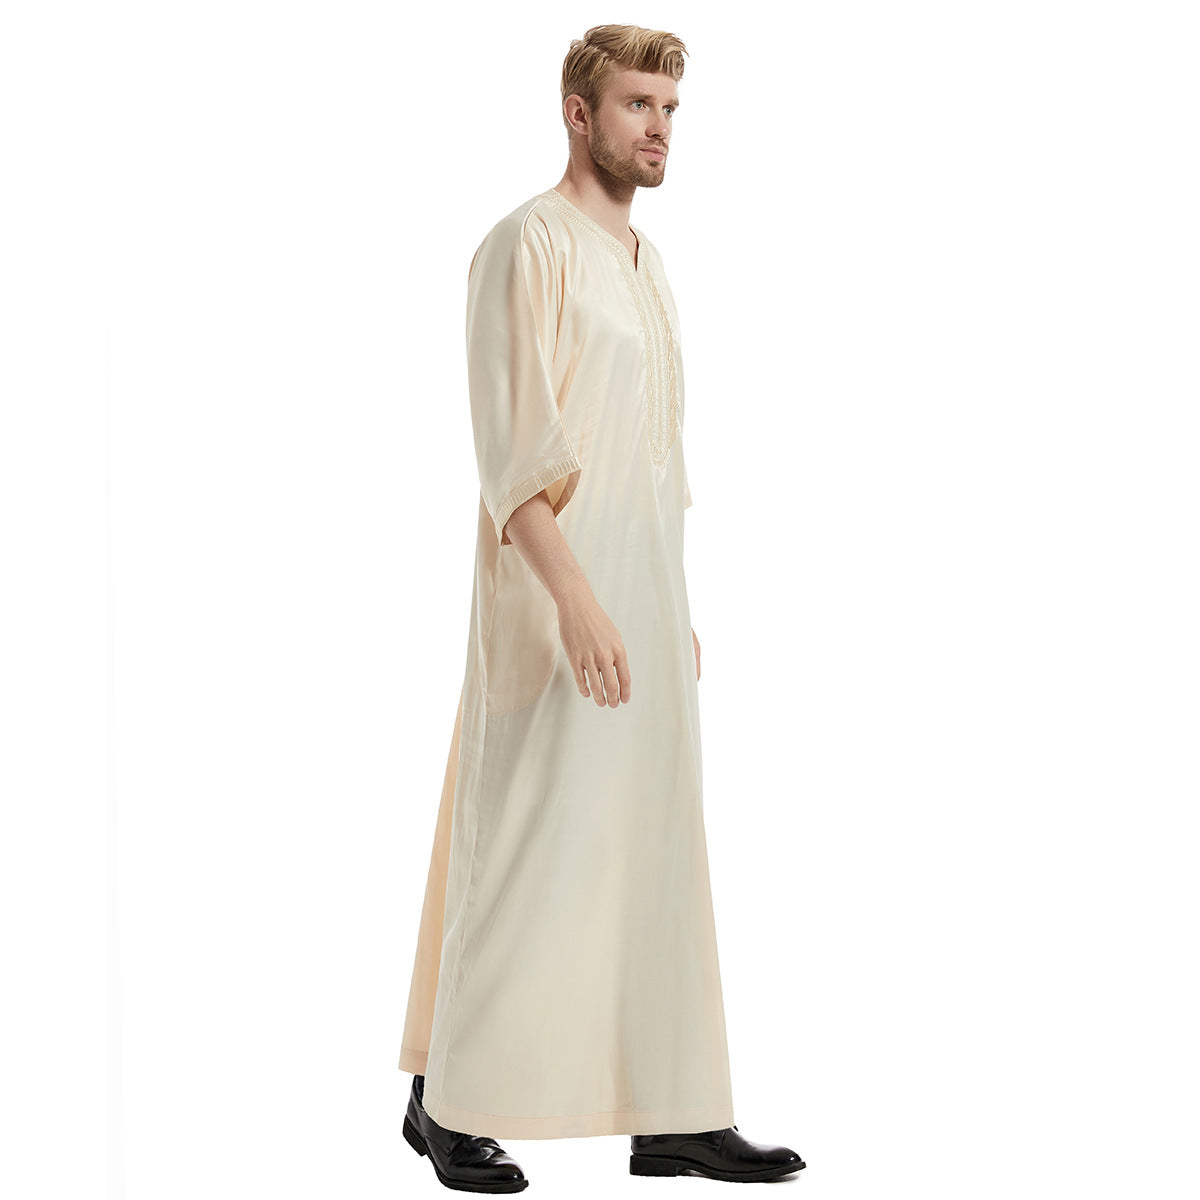 Discover elegance and modesty with Hikmah Boutique's Men's Abaya Half Sleeves in Beige. Premium materials and featuring exquisite embroidery, this abaya offers both style and comfort at a reasonable price. Elevate your Modest Clothing wardrobe with our exclusive collection of Islamic clothing for men. Shop now!